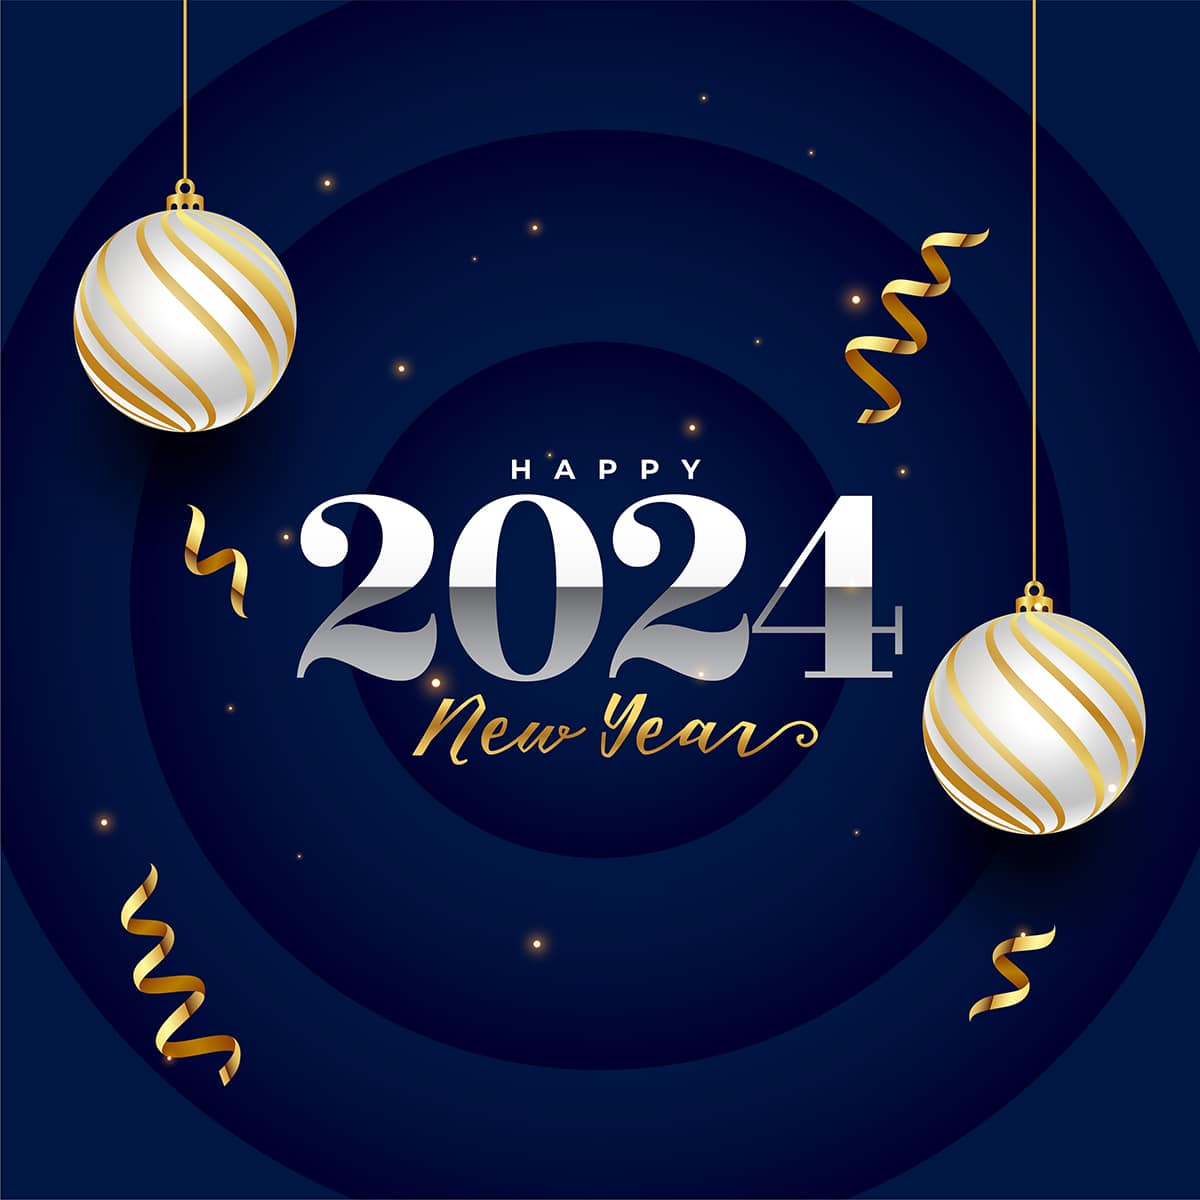  Happy new year 2024 wishes in english, Happy New Year 2023 wishes text, Happy New Year 2024 wishes in english